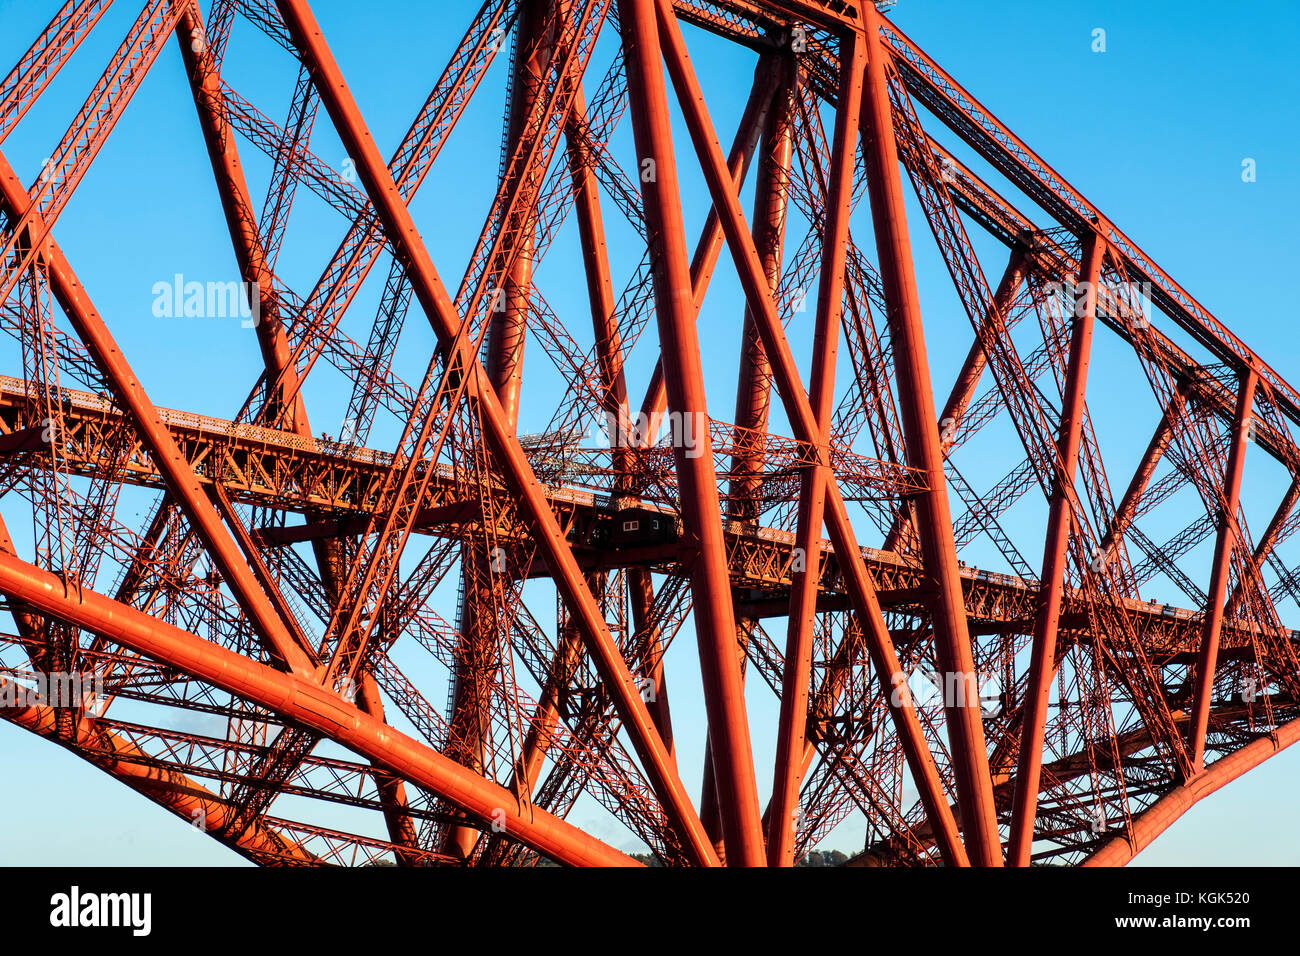 View of famous Forth Rail Bridge spanning the Firth of Forth between Fife and West Lothian in Scotland, United Kingdom. Stock Photo